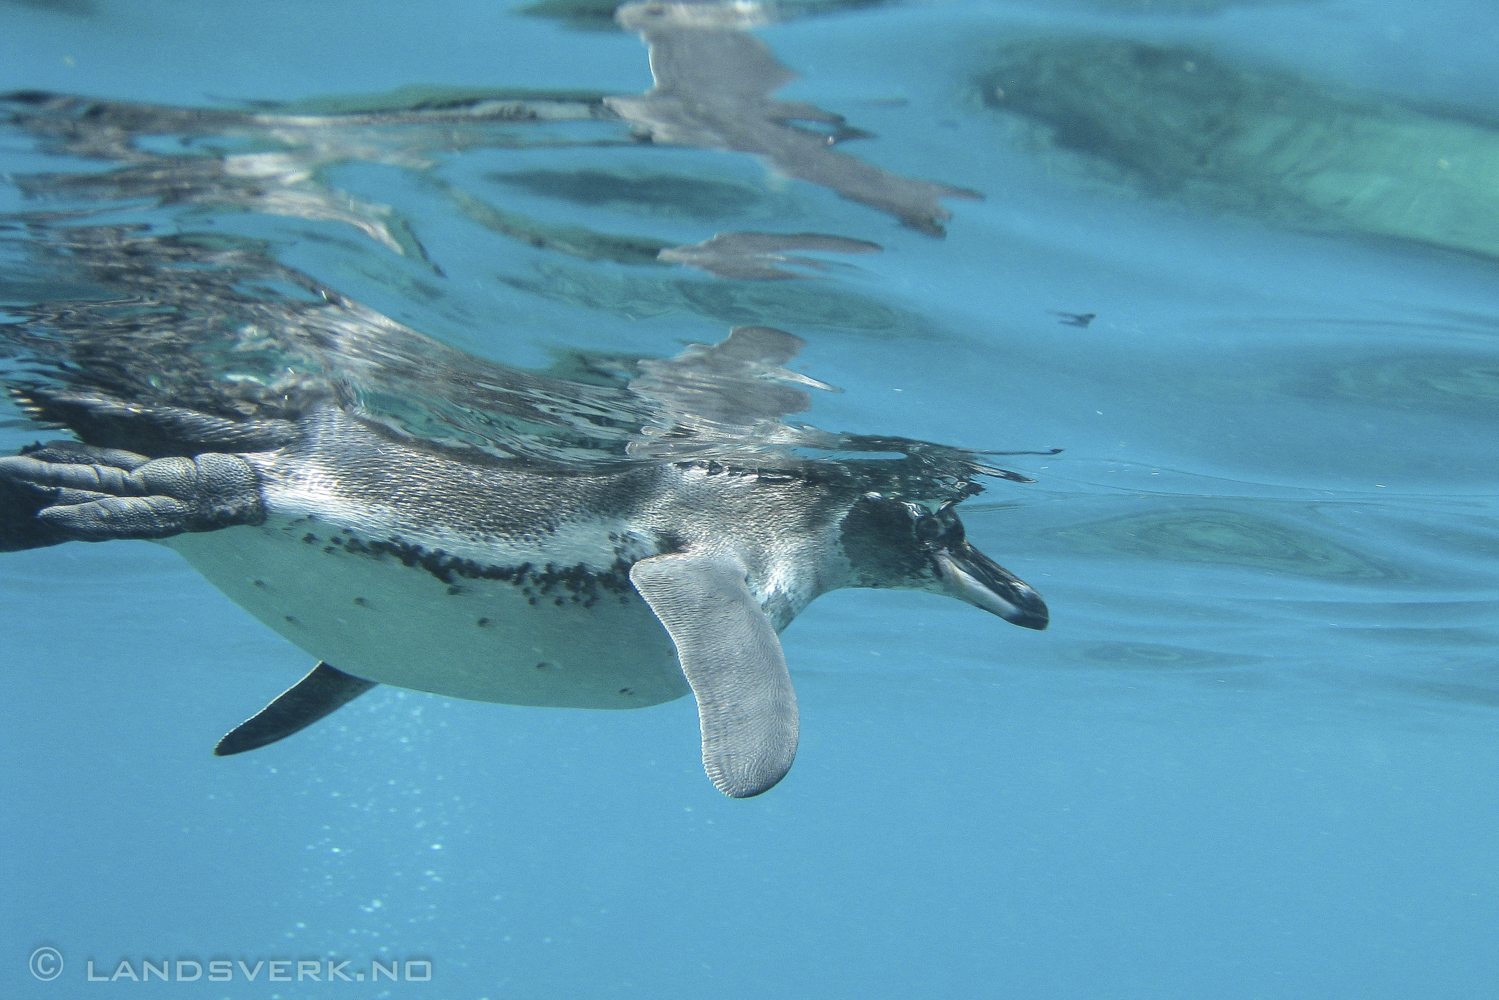 Wild Galapagos Penguin, Bartolome Island, Galapagos. Faster in water than anything else I've seen. Luckily it managed to hold still for 1 second. 

(Canon IXUS 970IS / DiCaPac WP-310)